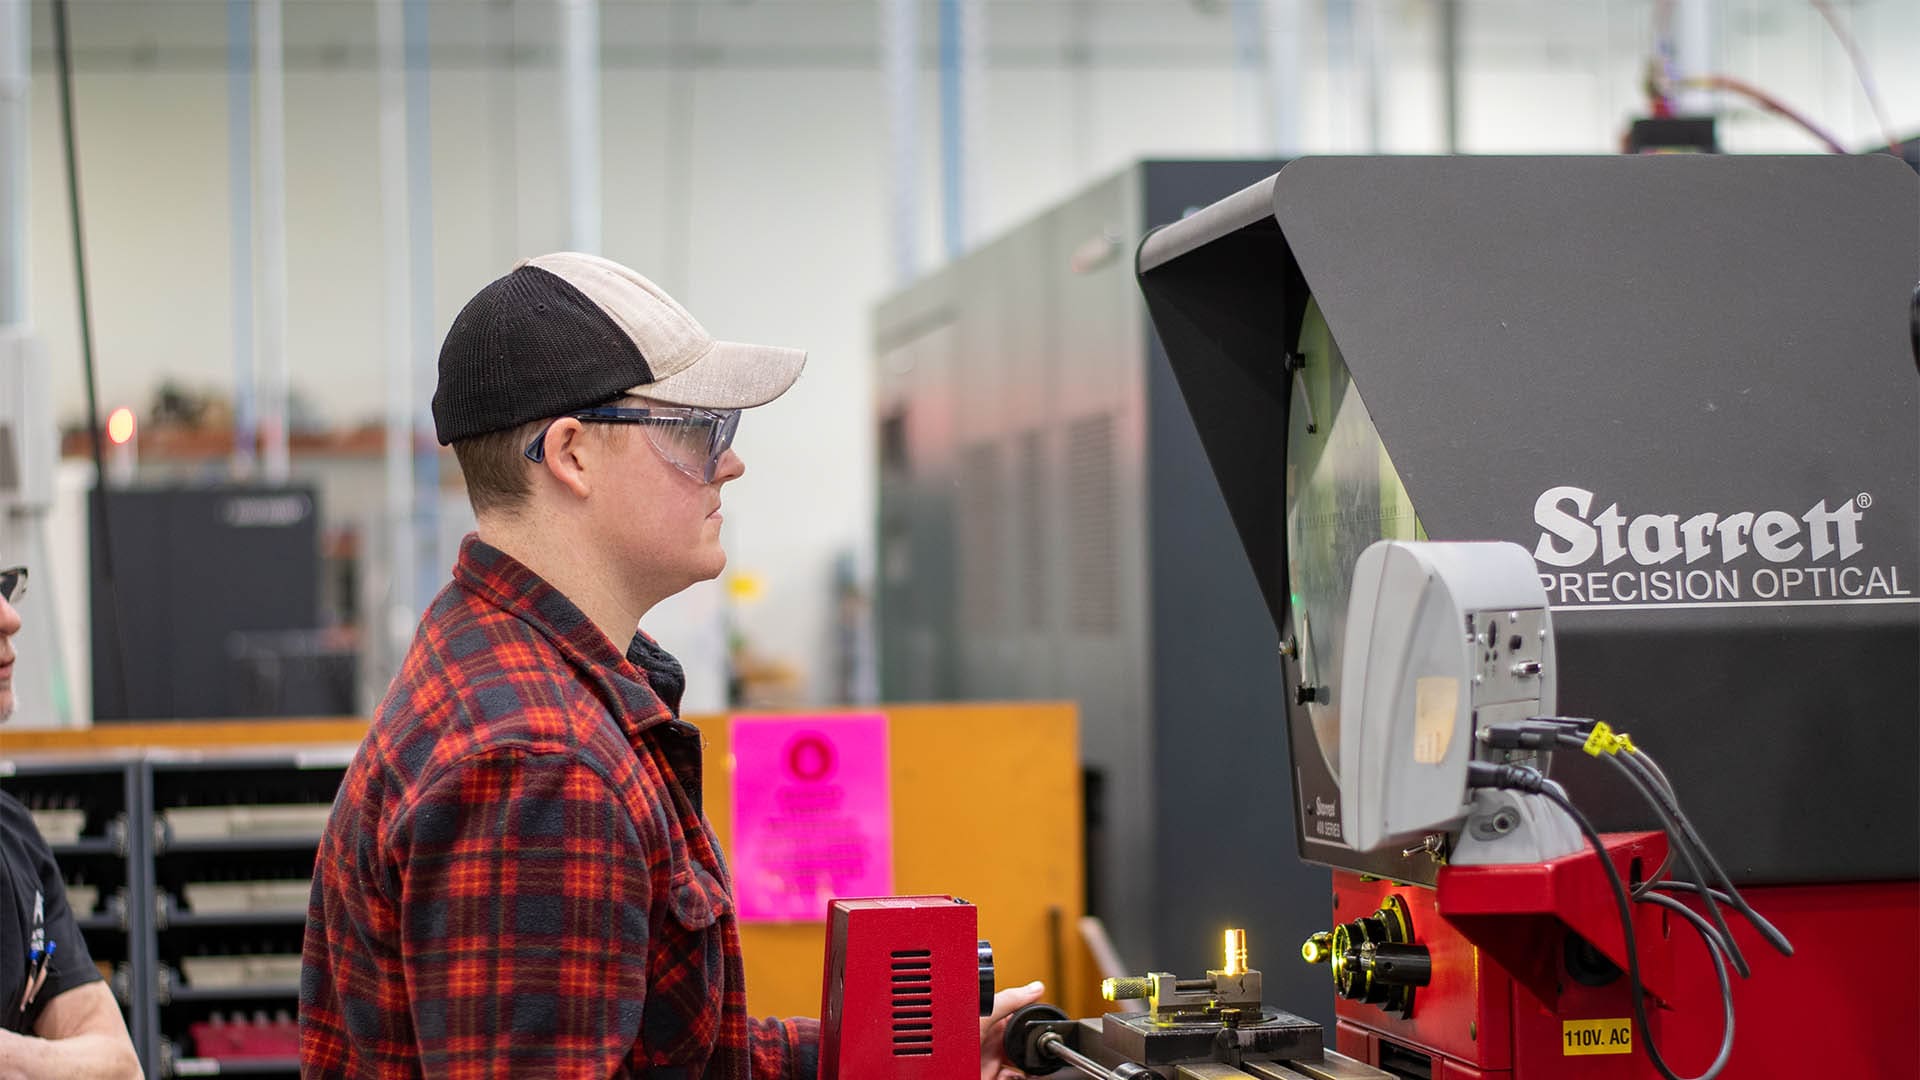 WorkEx intern uses equipment to test a machined part while his supervisor looks on.